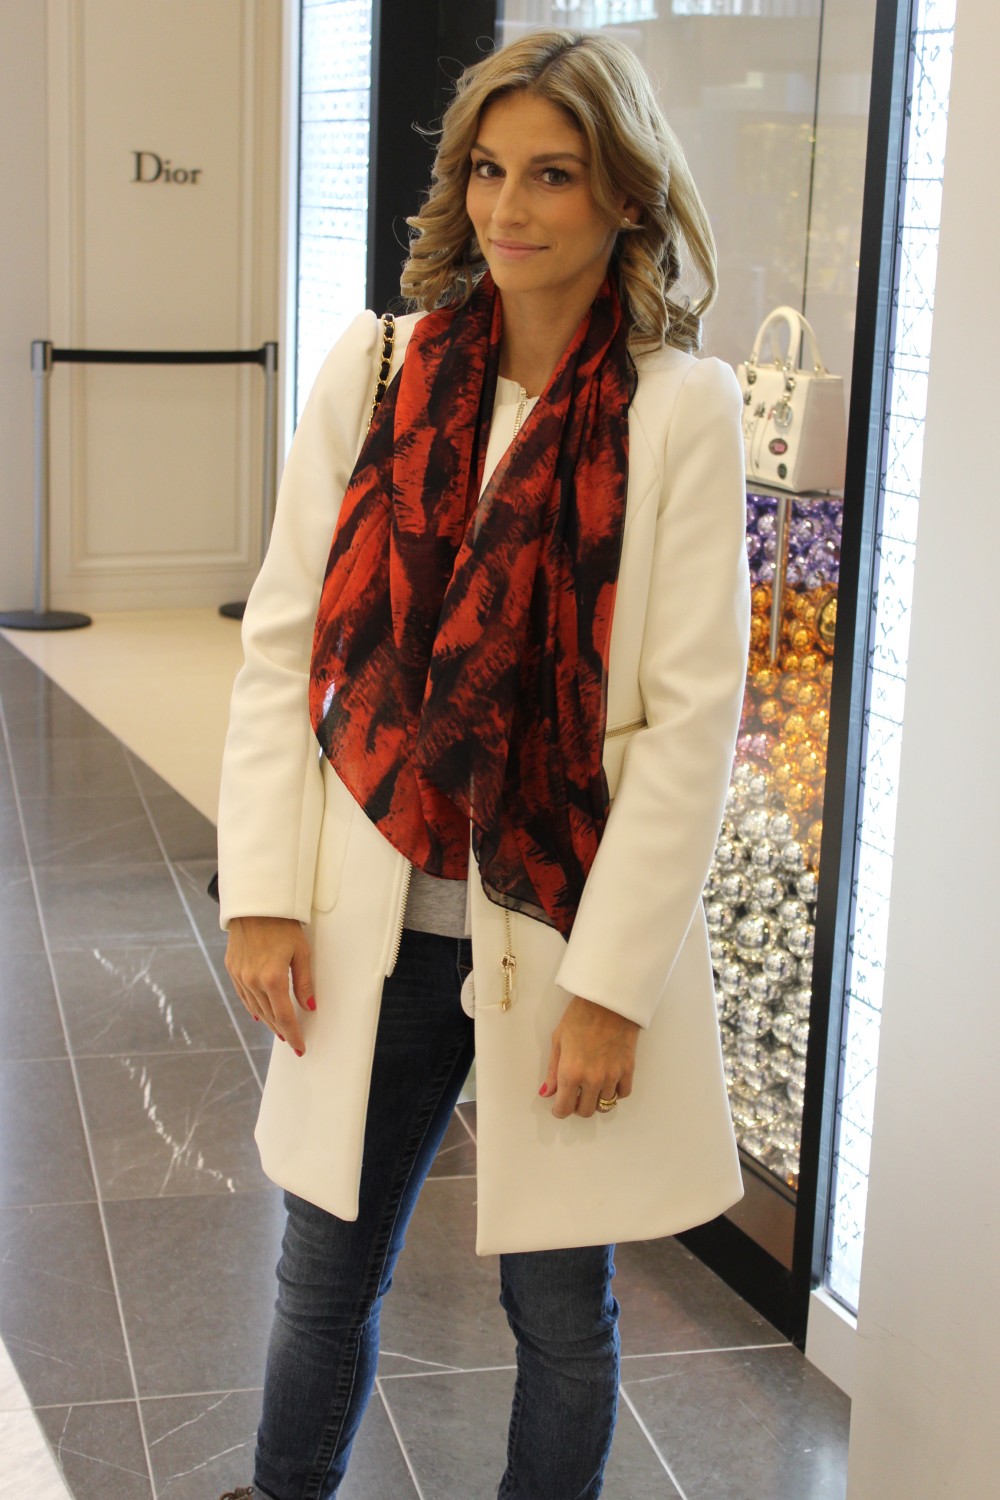 Anna Coroneo Scarves have landed in Canada Exclusively at Holt Renfrew